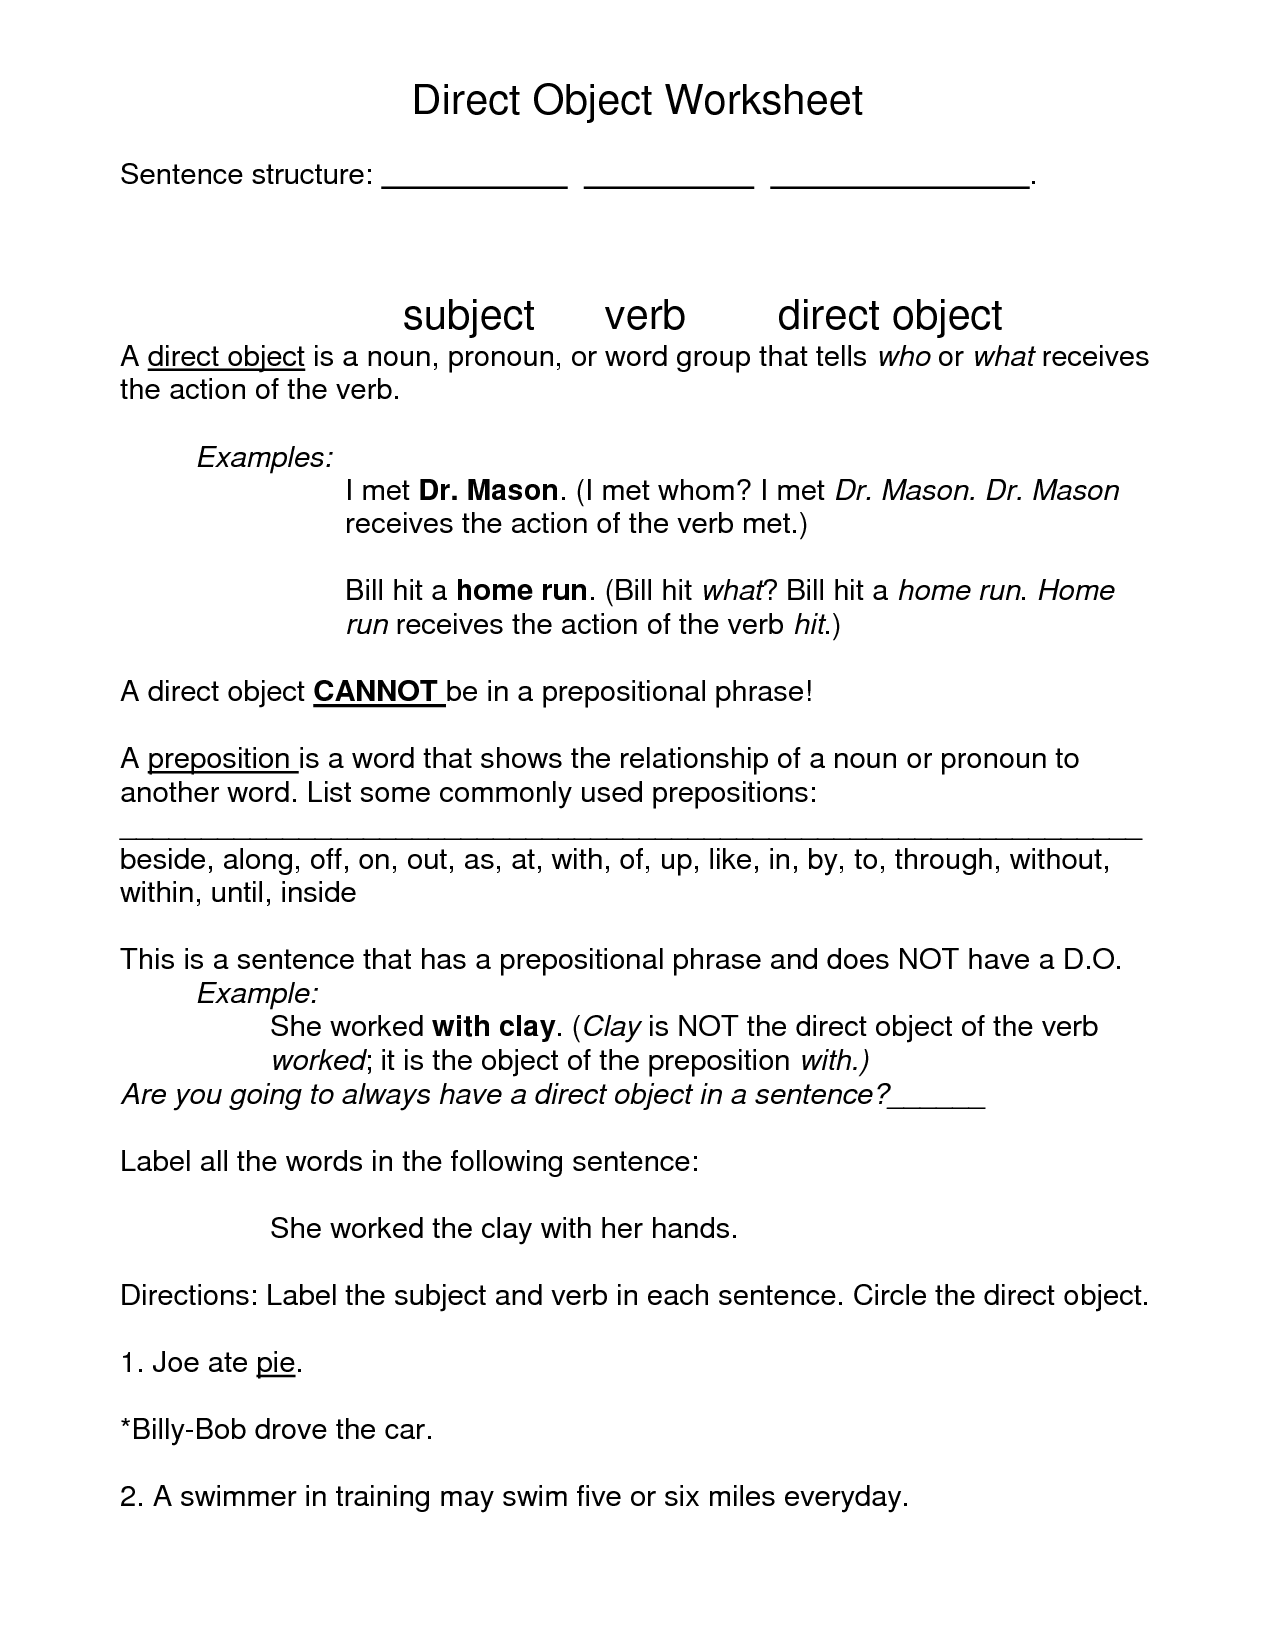 direct-object-pronouns-spanish-worksheet-db-excel